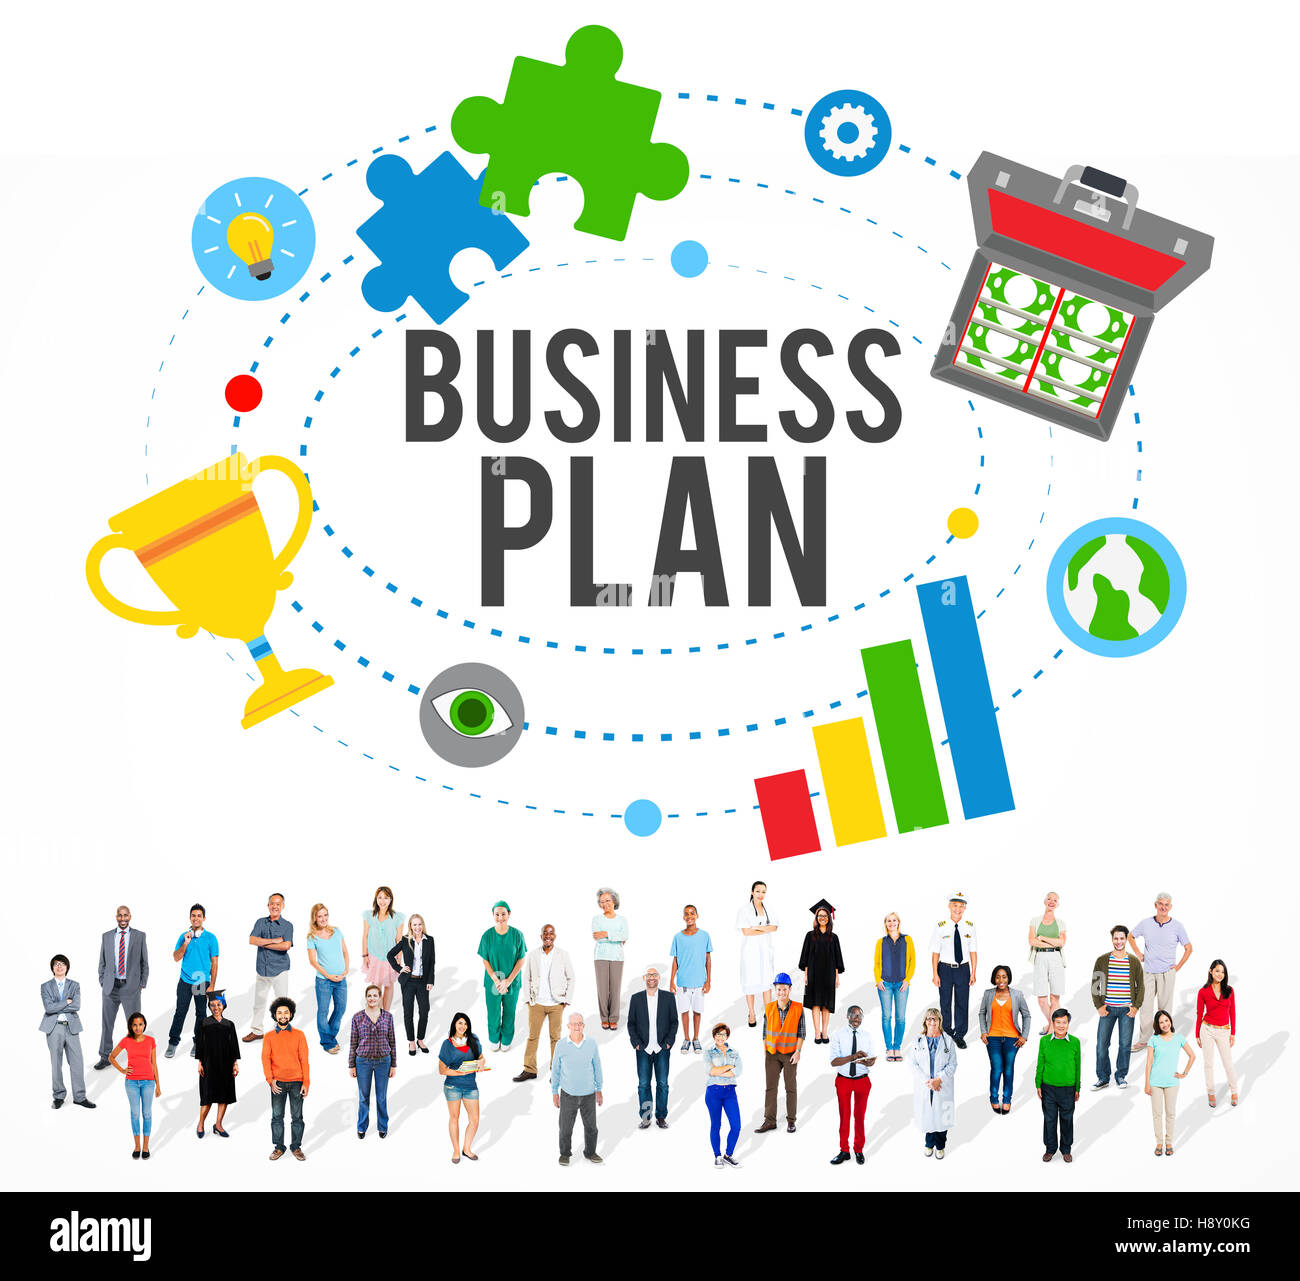 Business Plan Planning Mission Guidelines Concept Stock Photo